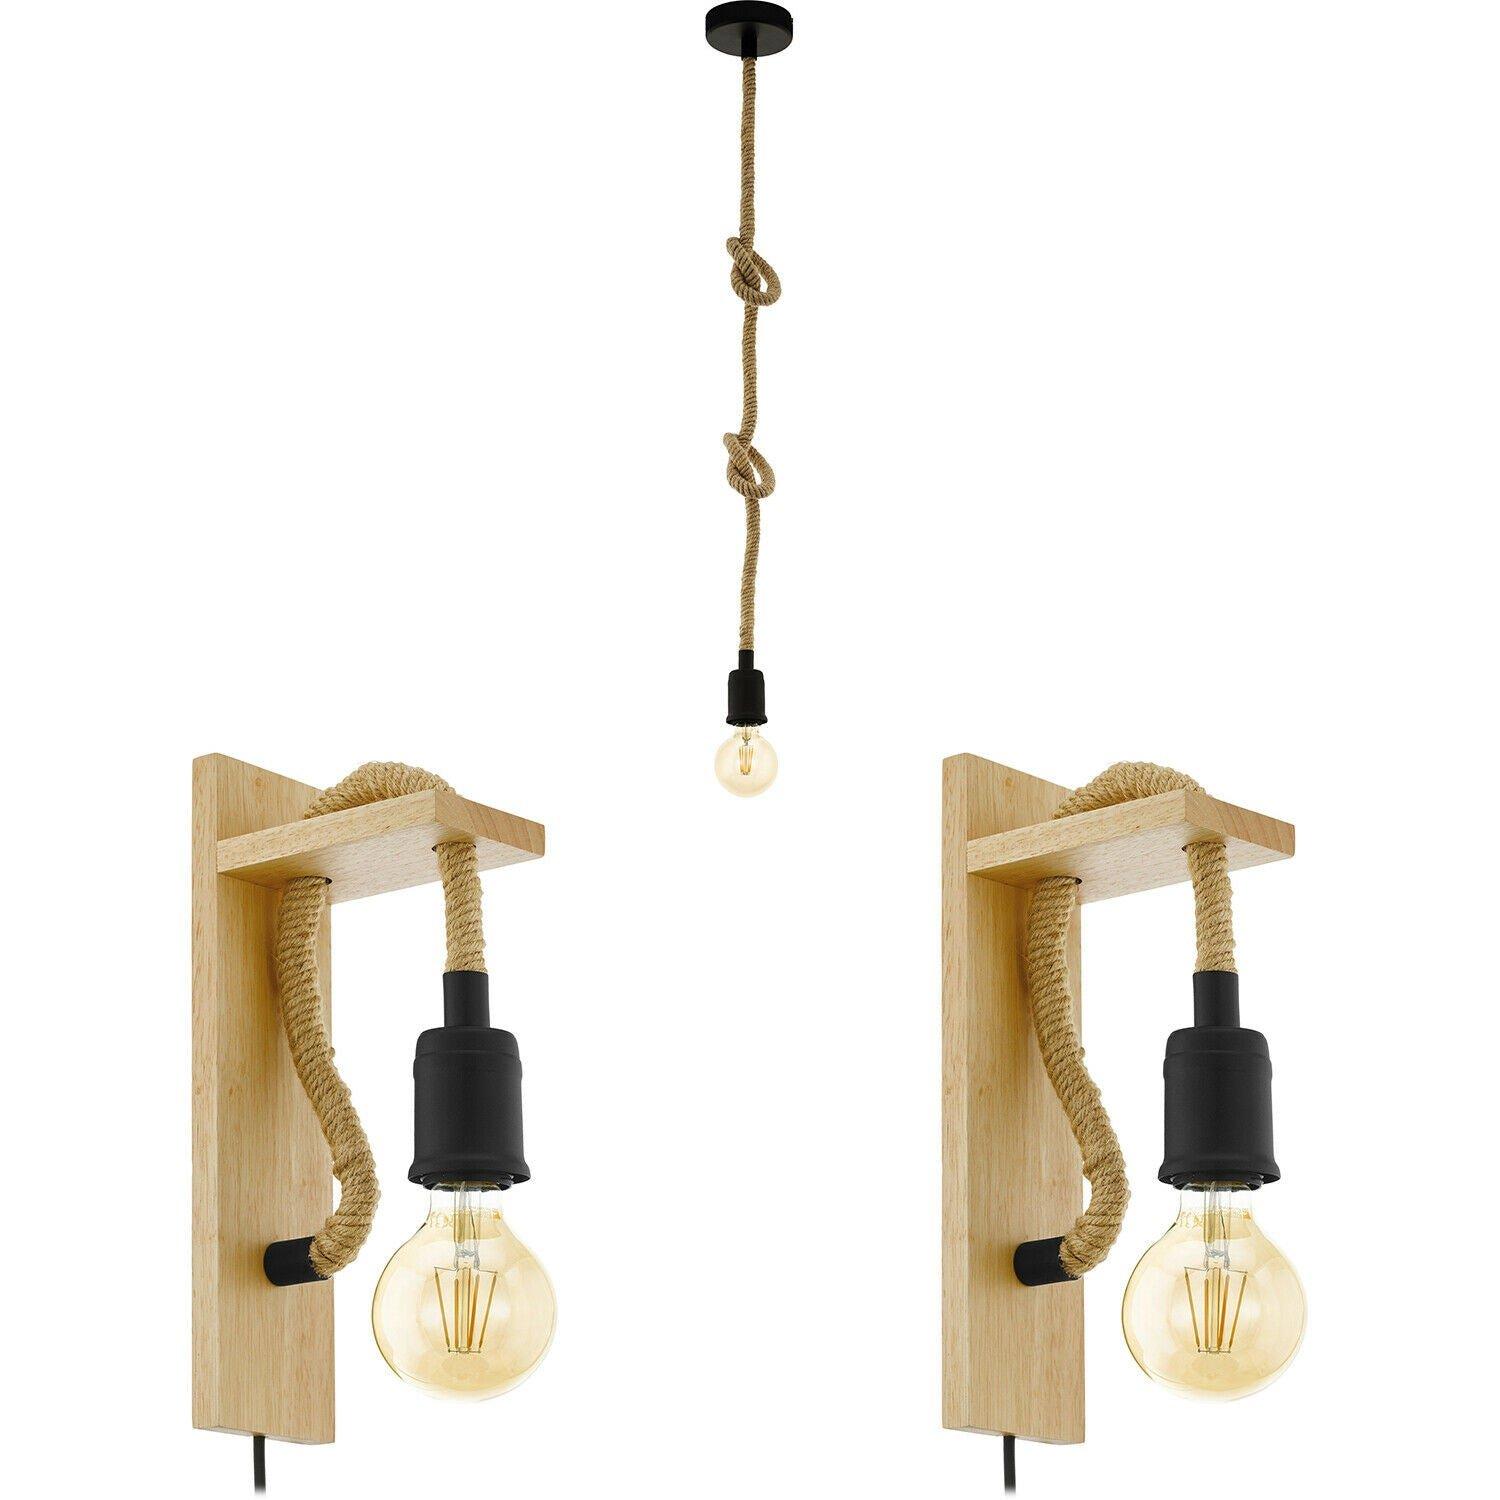 Ceiling Pendant Light & 2x Matching Wall Lights Black & Knot Rope Trendy Lamp